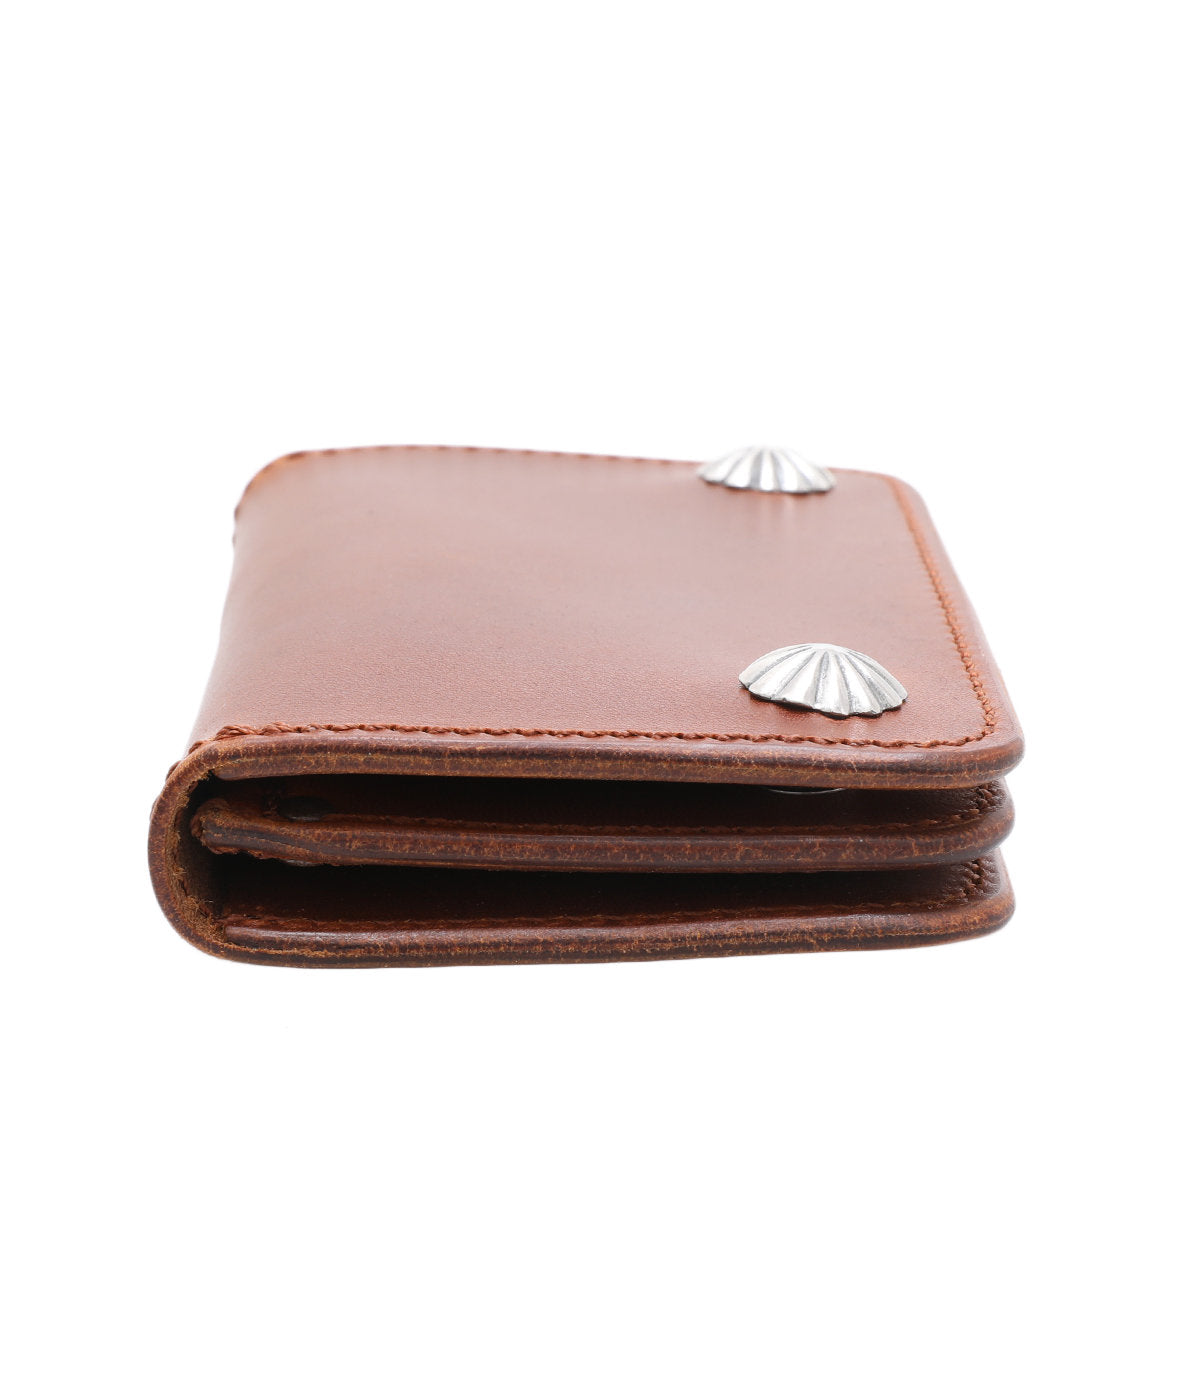 LARRY SMITH TRUCKERS WALLET No. 1 (SHELL) -S- – unexpected store